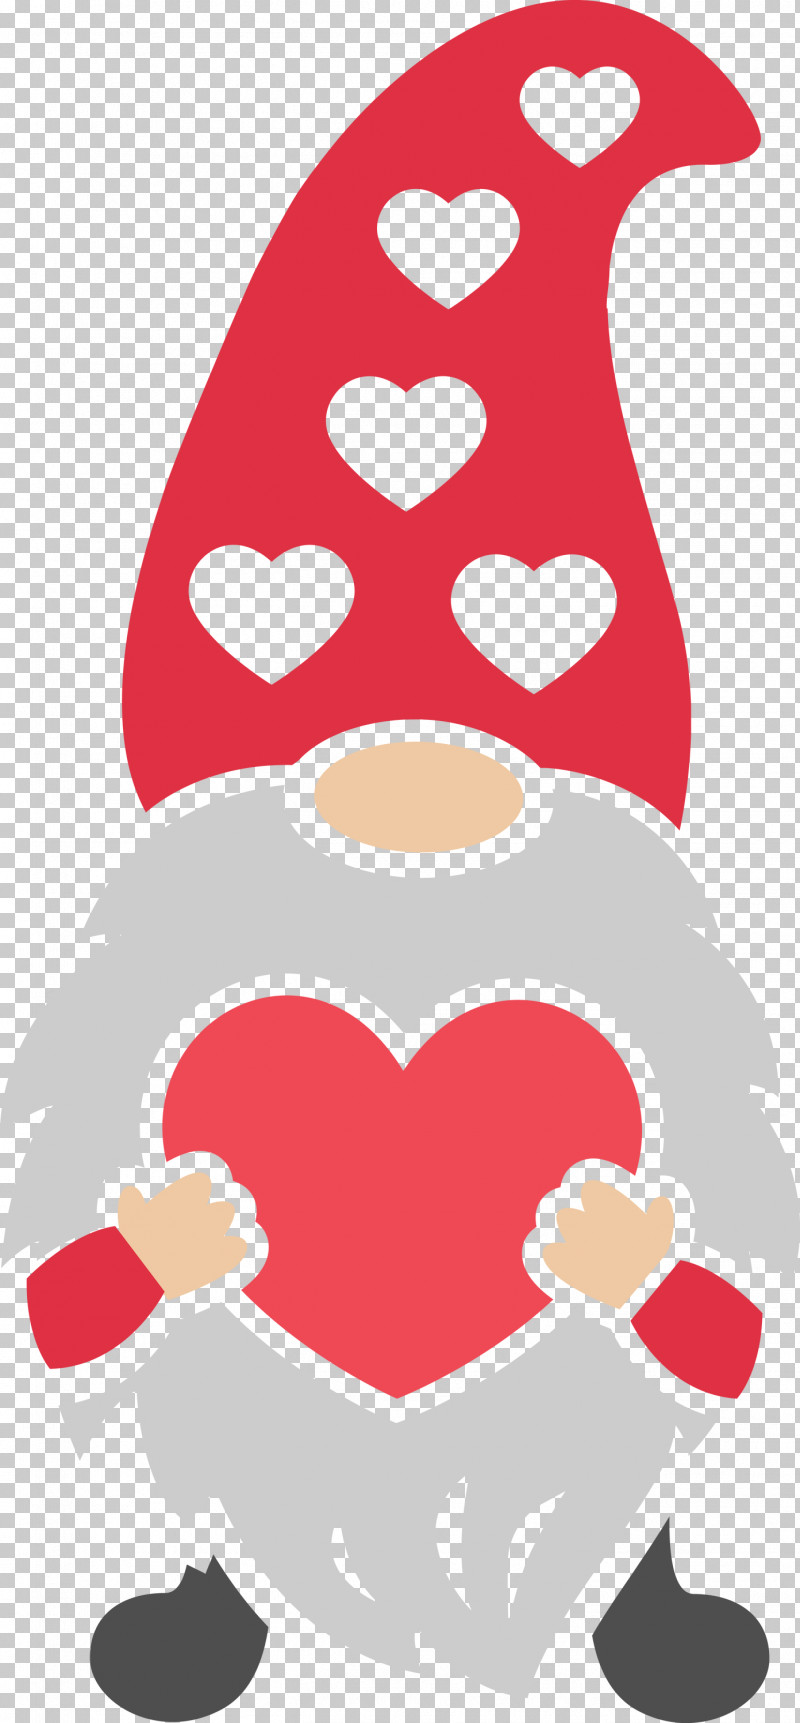 Gnome Loving Red Heart PNG, Clipart, Cartoon, Gnome, Heart, Love, Loving Free PNG Download